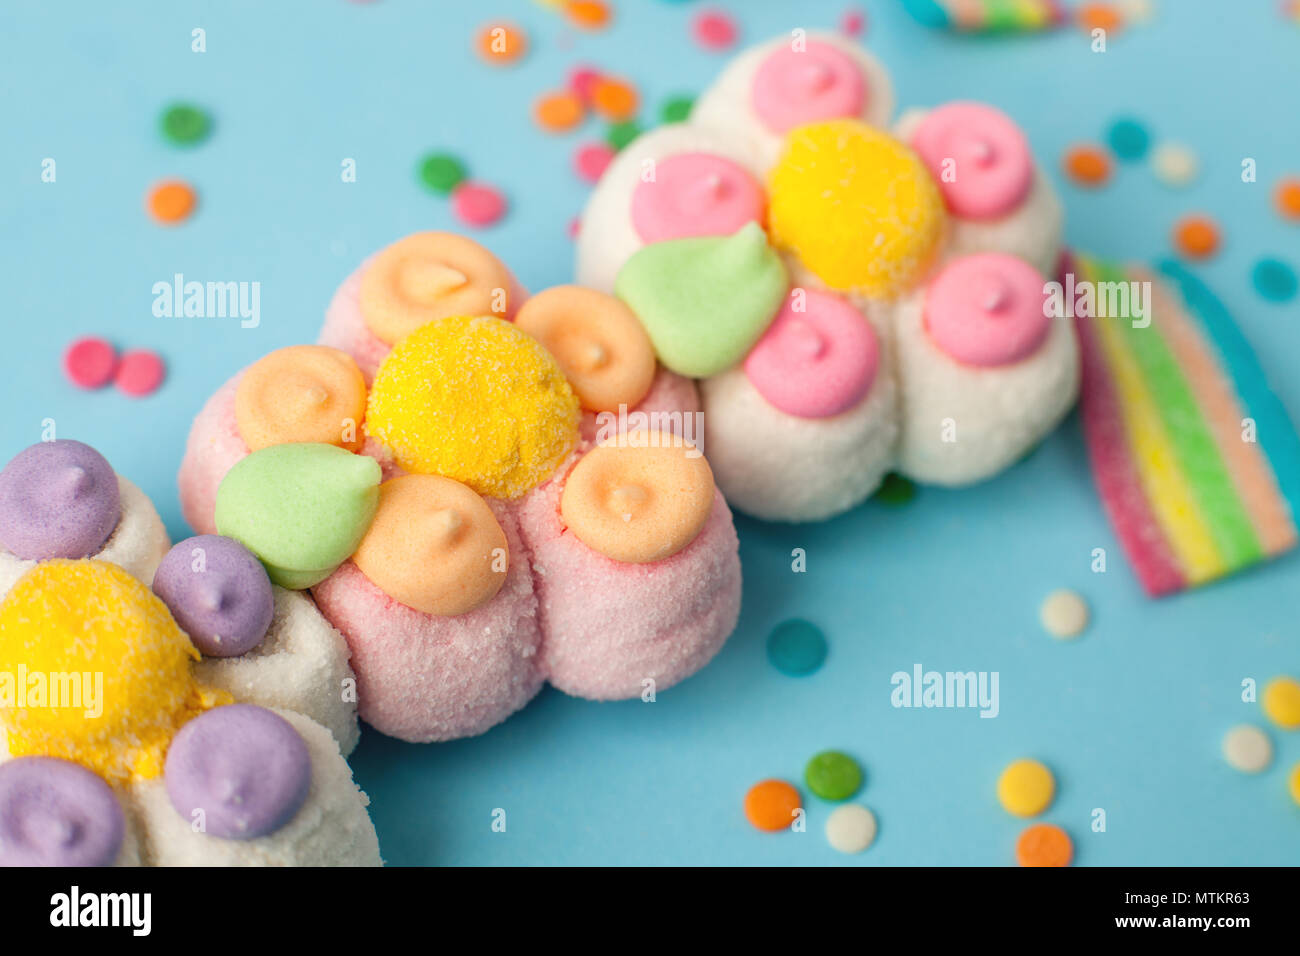 candies with jelly and sugar pattern. colorful array of different childs sweets and treats. Bright party background, kids sweetness flowers marmalade Stock Photo